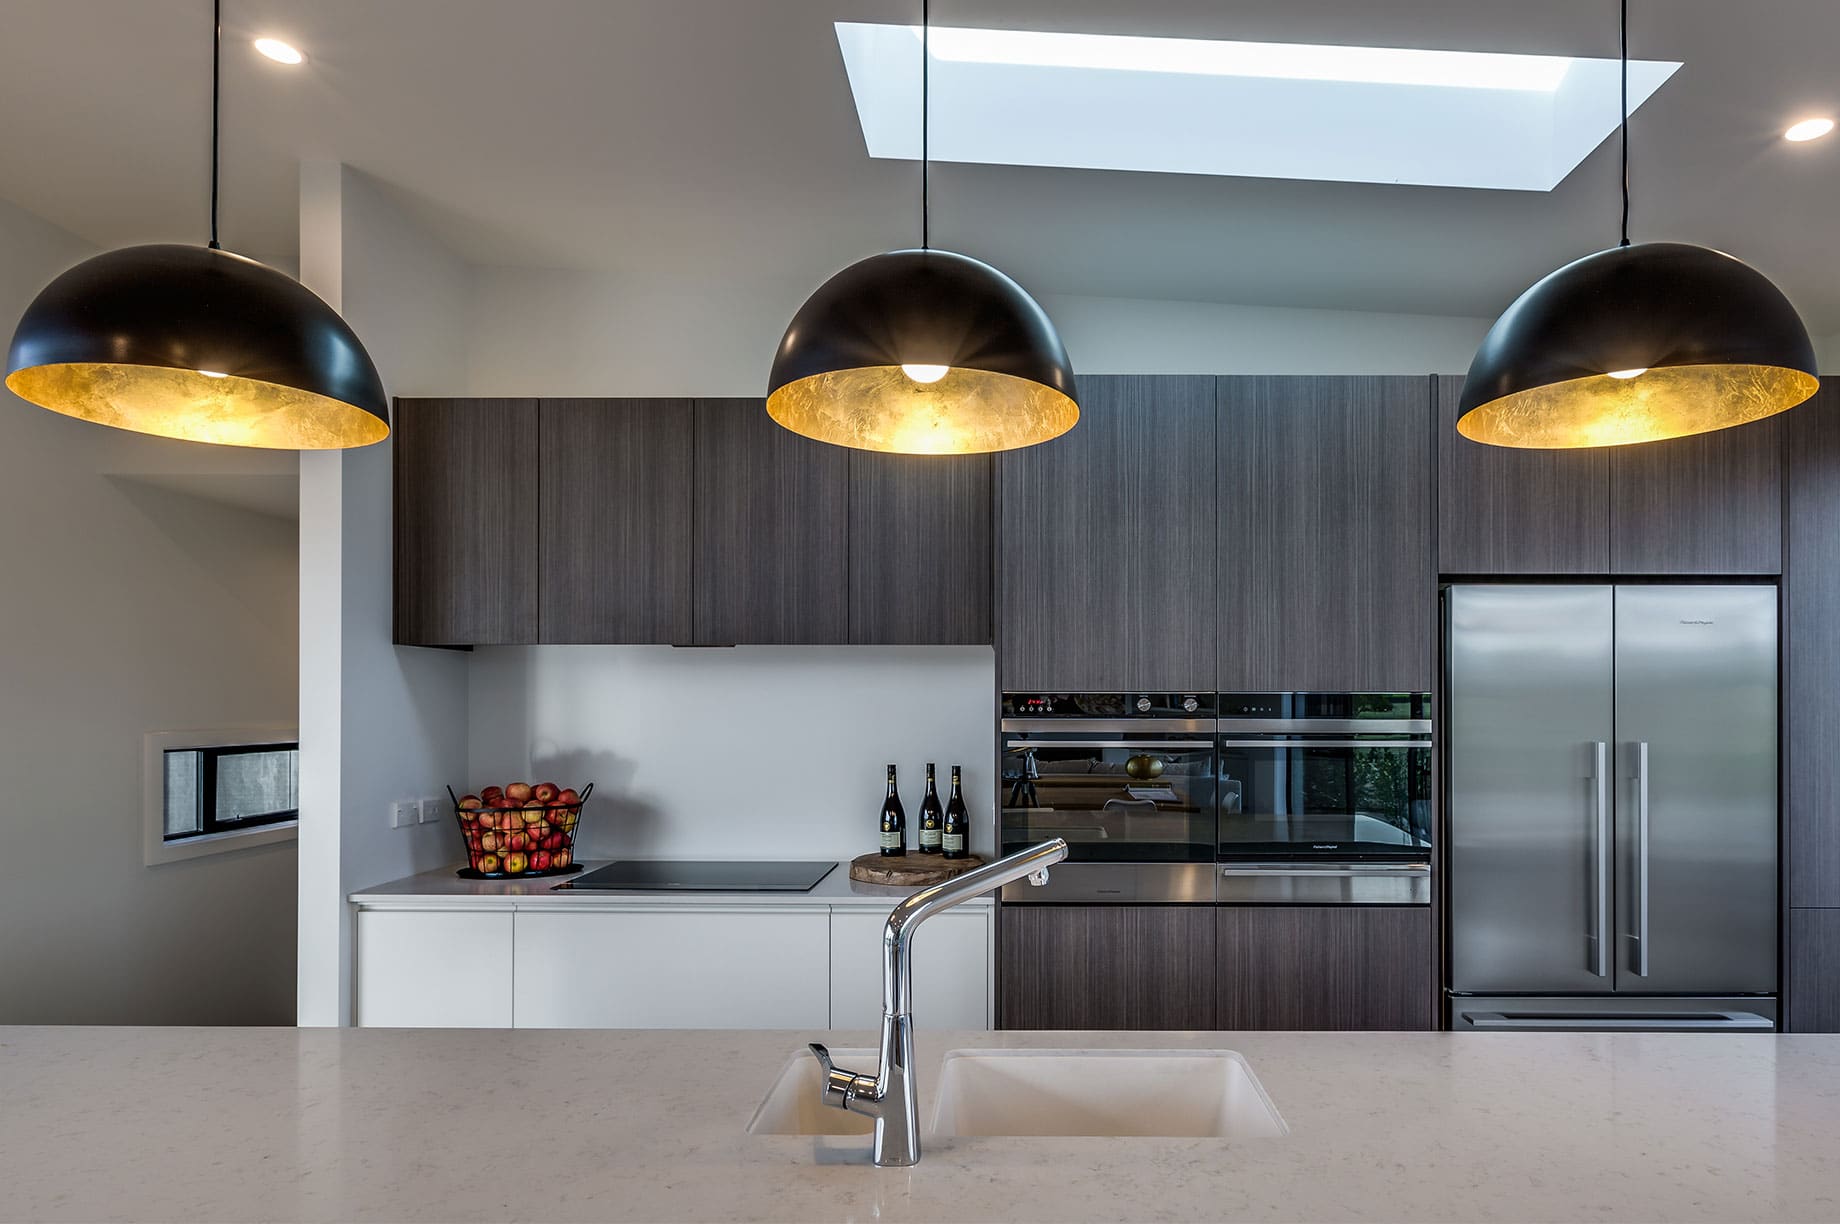 Kitchen interior with hanging lights